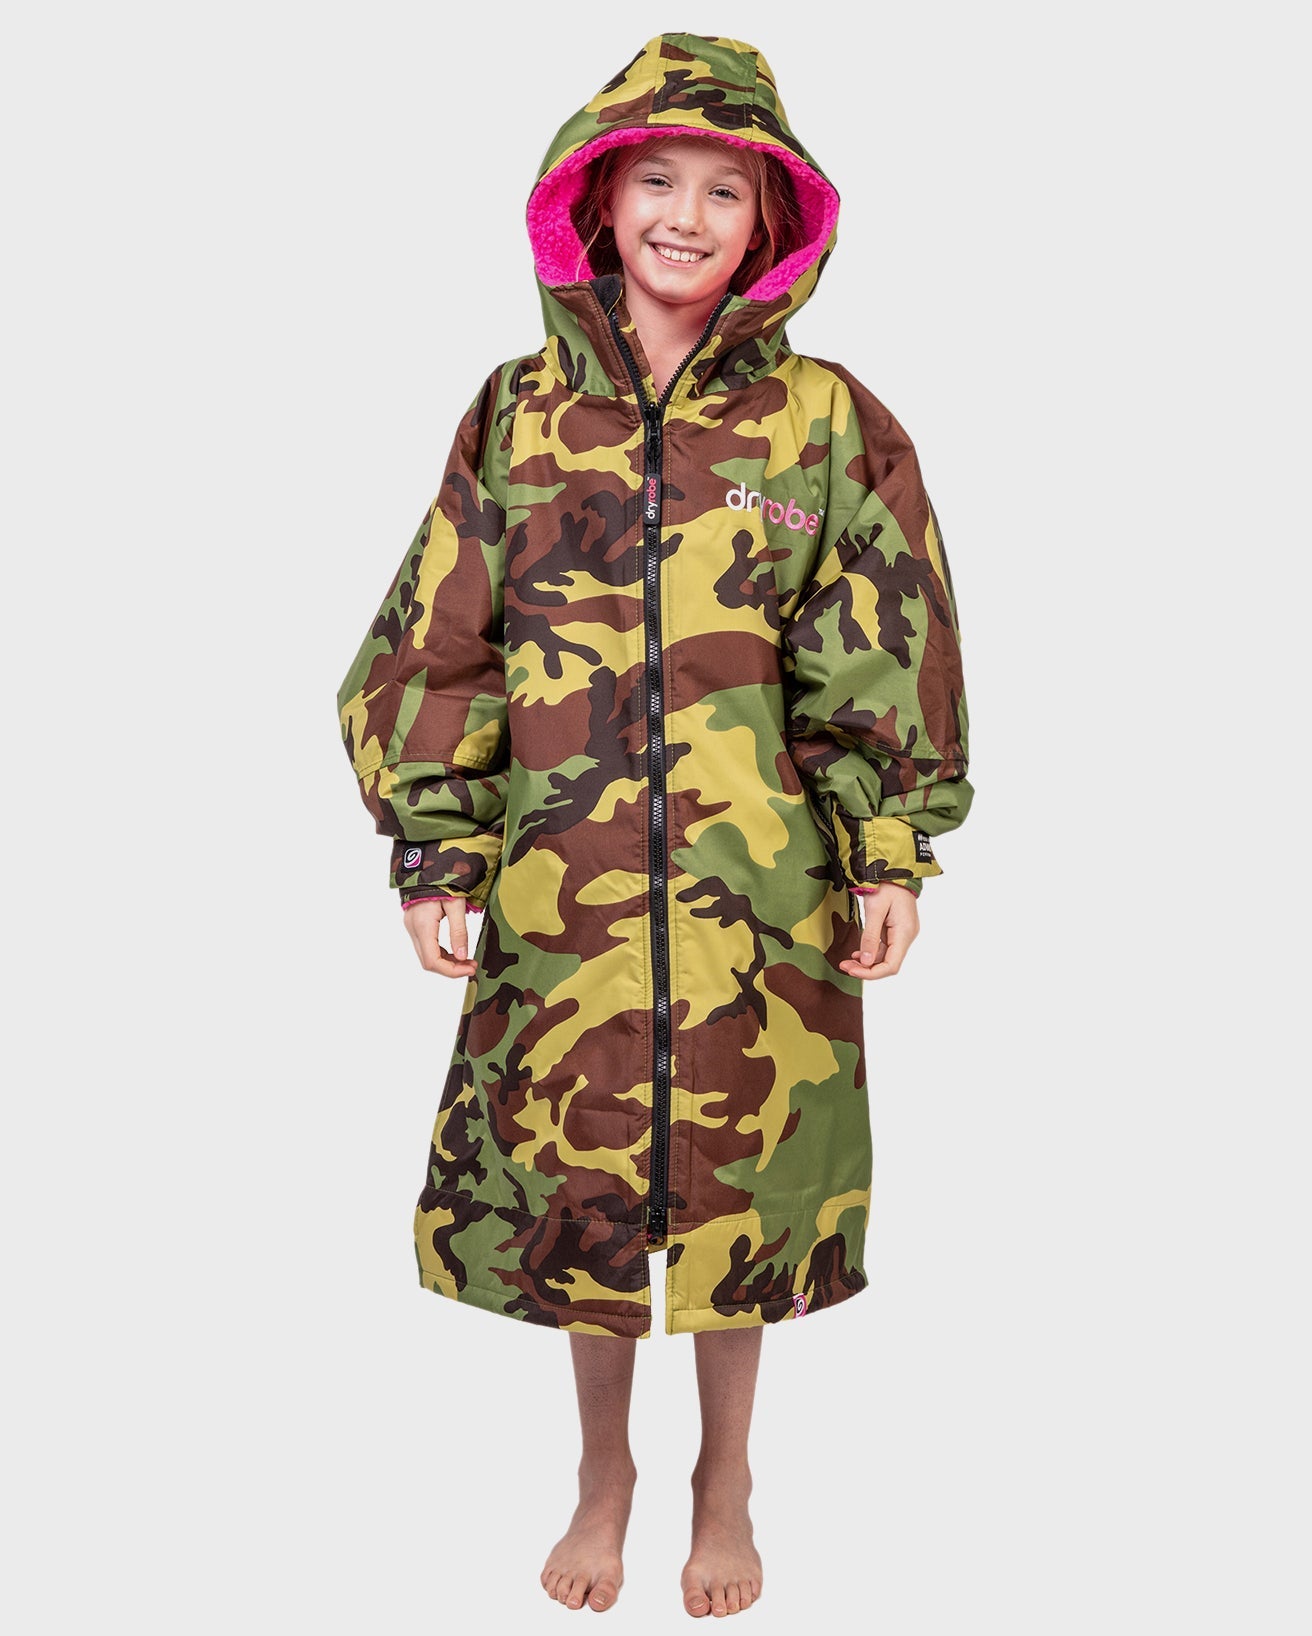 1|Girl smilng wearing Camo Pink dryrobe® Advance Kids Long Sleeve with hood up